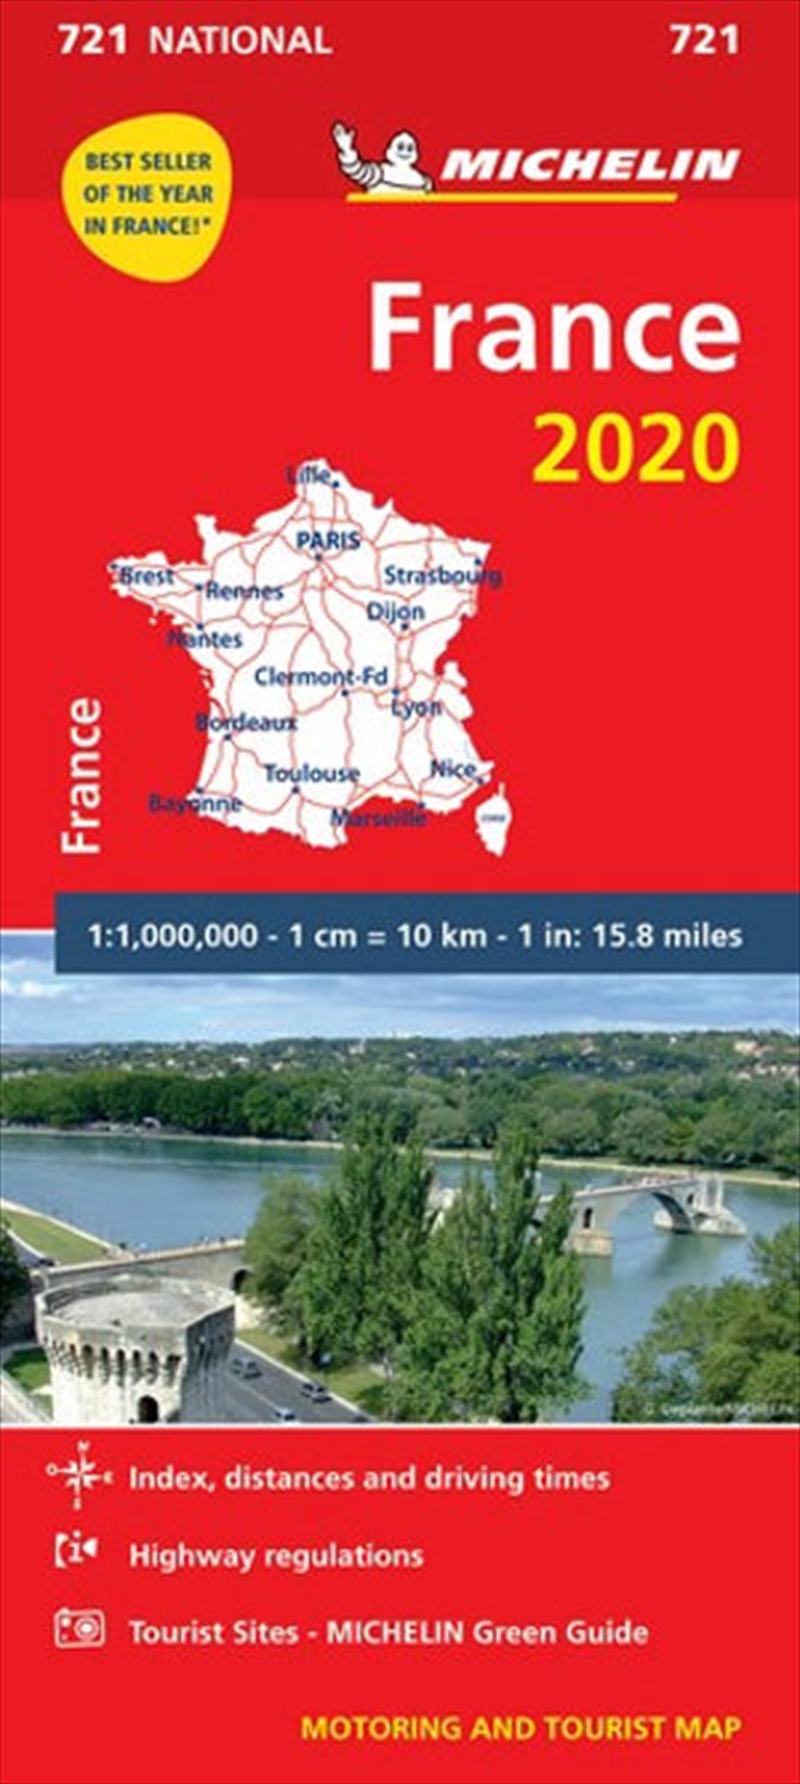 France 2020 Michelin National Road Map 721 | Sheet Map